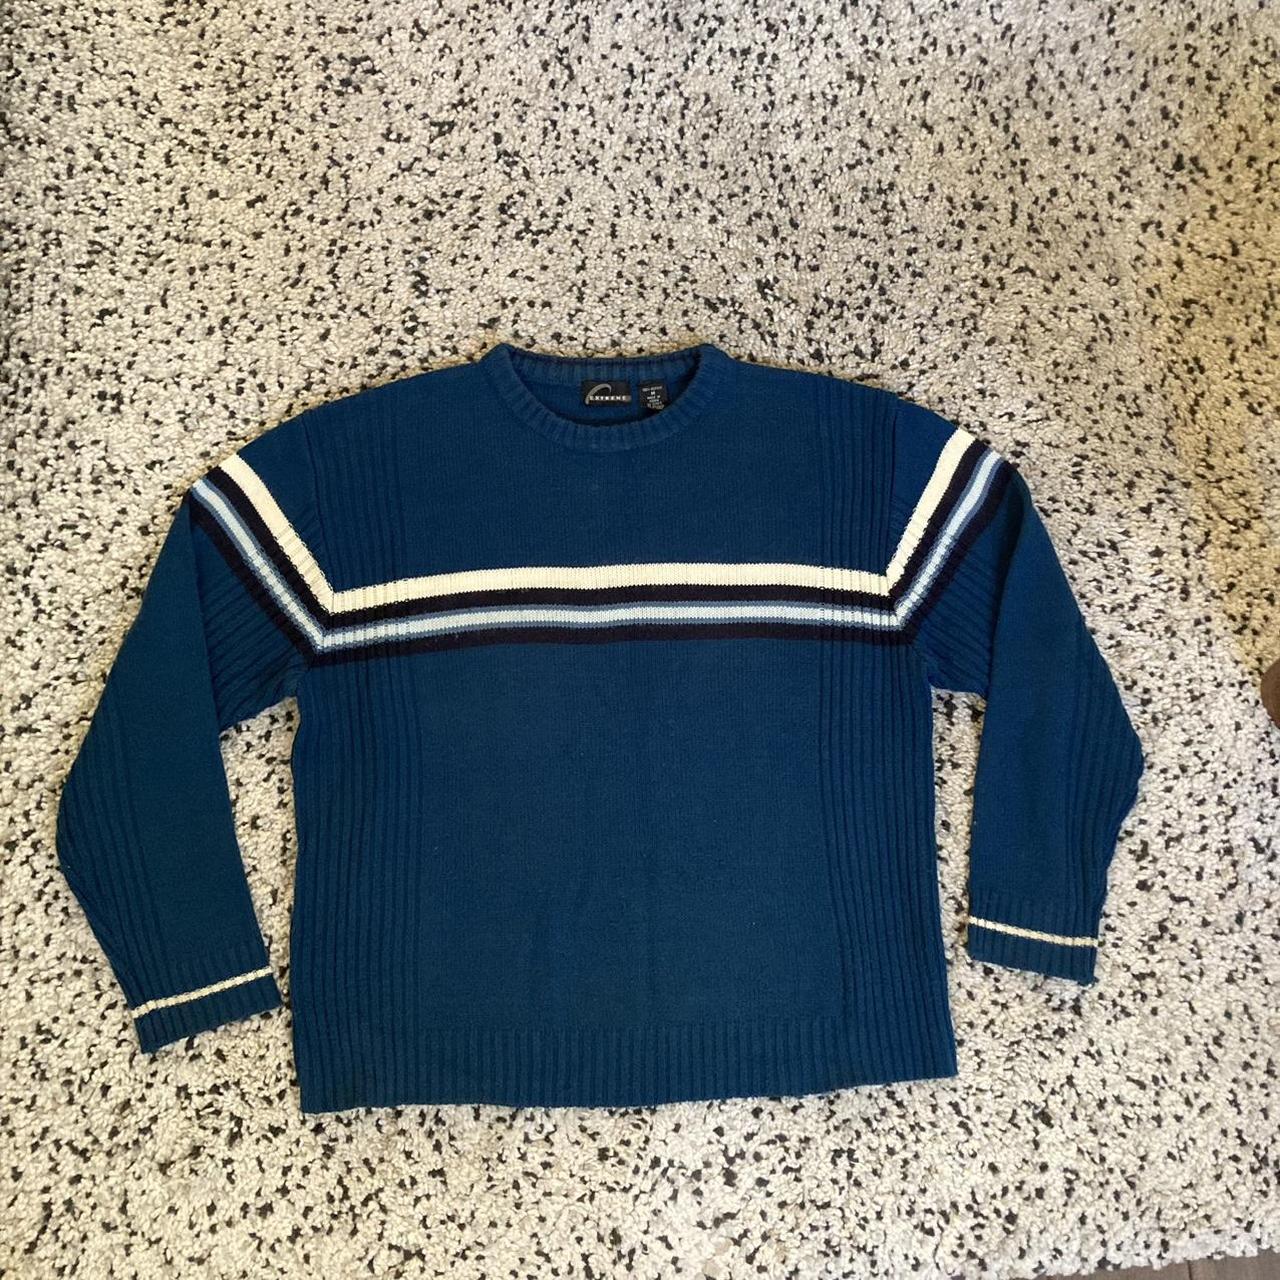 Extreme Fit Men's Blue and White Jumper